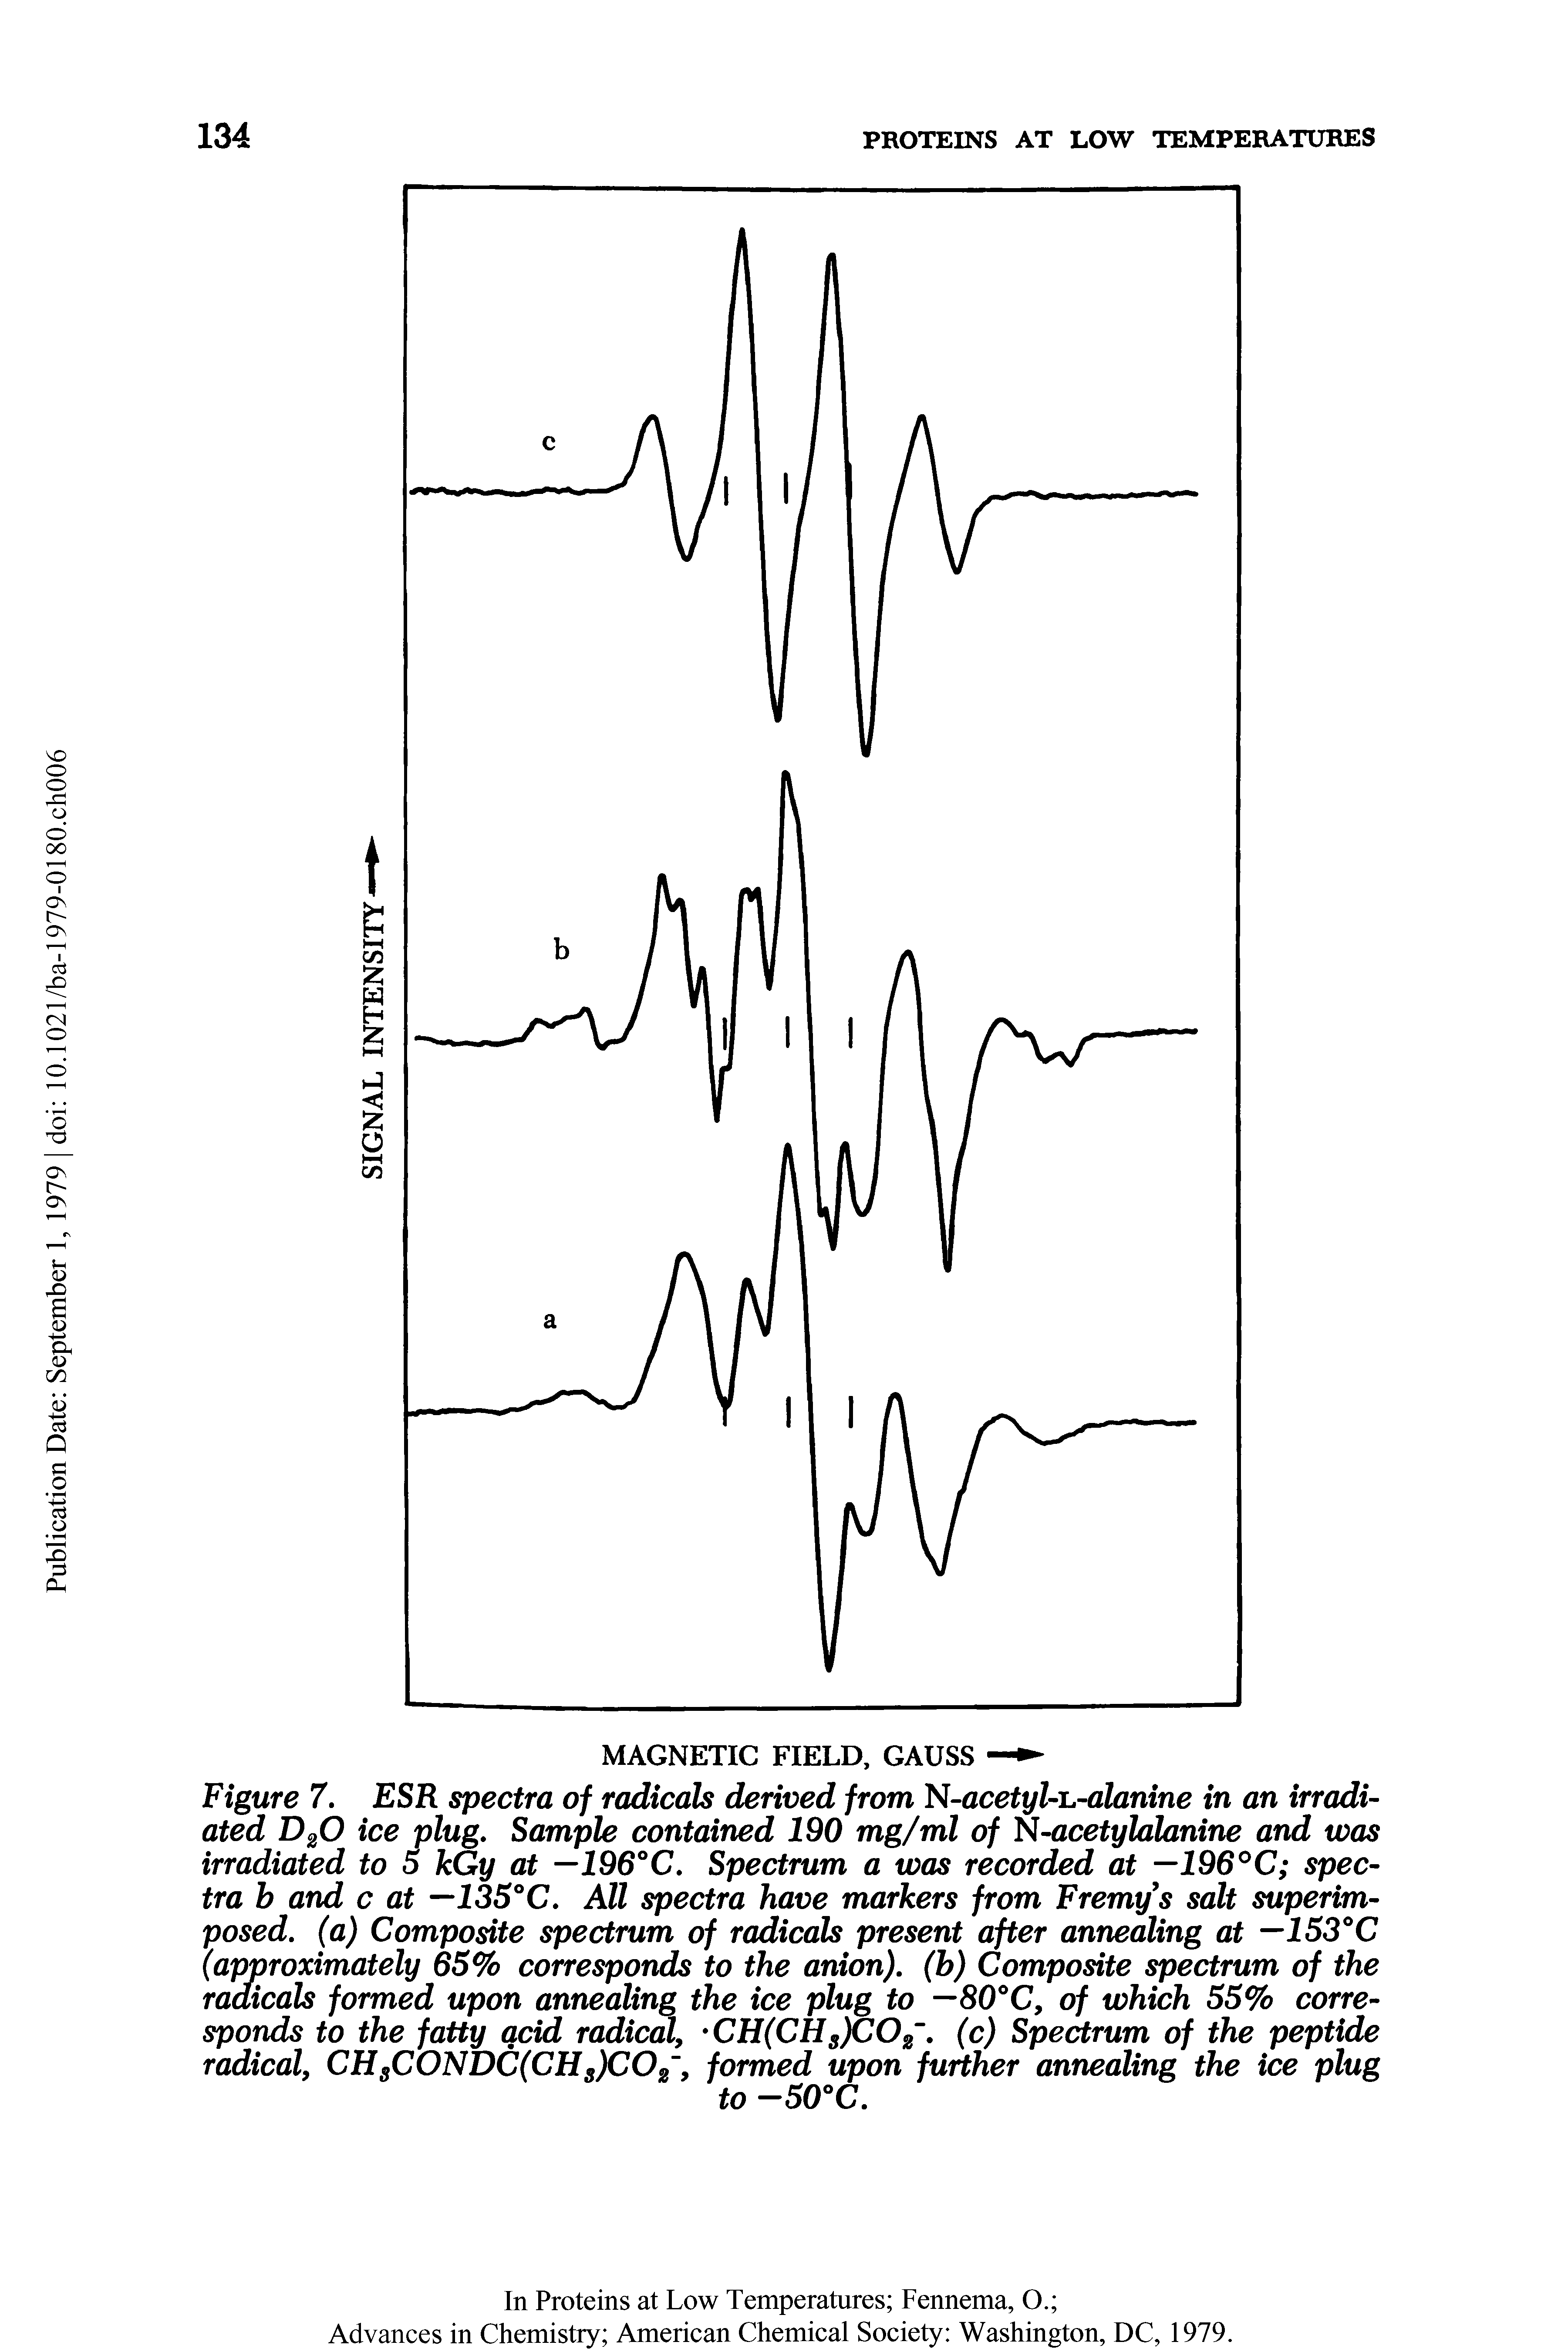 Figure 7. ESR spectra of radicals derived from N-acetyl-iL-alanine in an irradiated D20 ice plug. Sample contained 190 mg/ml of N-acetylalanine and was irradiated to 5 kGy at —196°C. Spectrum a was recorded at —196°C spectra b and c at —135°C. All spectra have markers from Fremys salt superimposed. (a) Composite spectrum of radicals present after annealing at —153°C (approximately 65% corresponds to the anion), (b) Composite spectrum of the radicals formed upon annealing the ice plug to — 80°C, of which 55% corresponds to the fatty acid radical, -CH(CHS)C02. (c) Spectrum of the peptide radical, CHsC0NDC(CHs)C02, formed upon further annealing the ice plug...